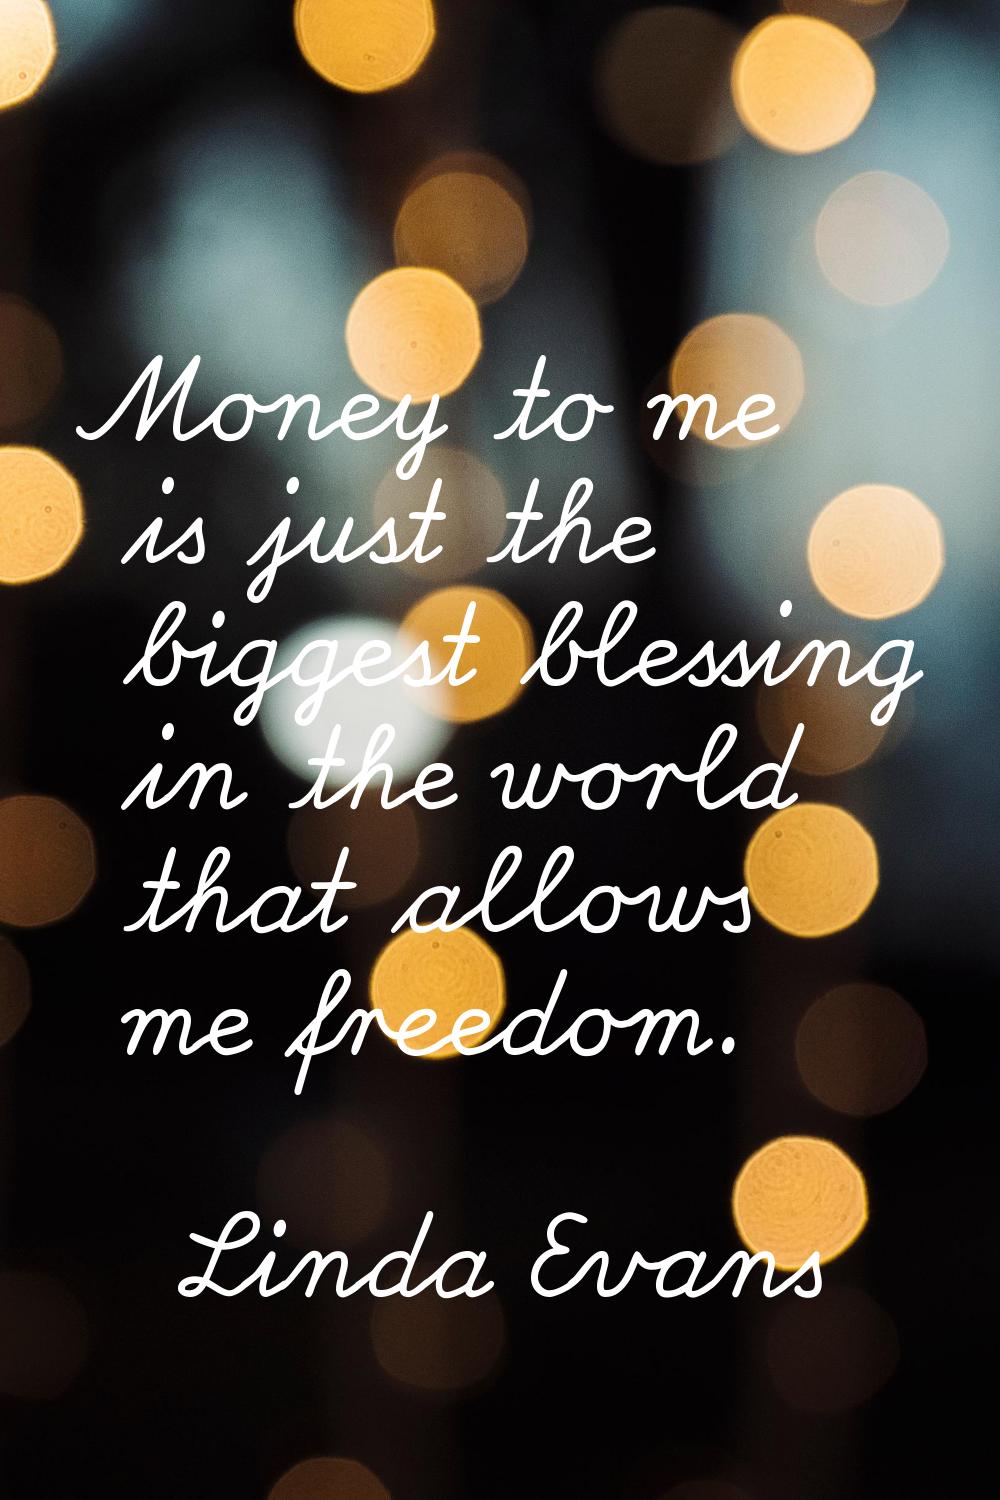 Money to me is just the biggest blessing in the world that allows me freedom.